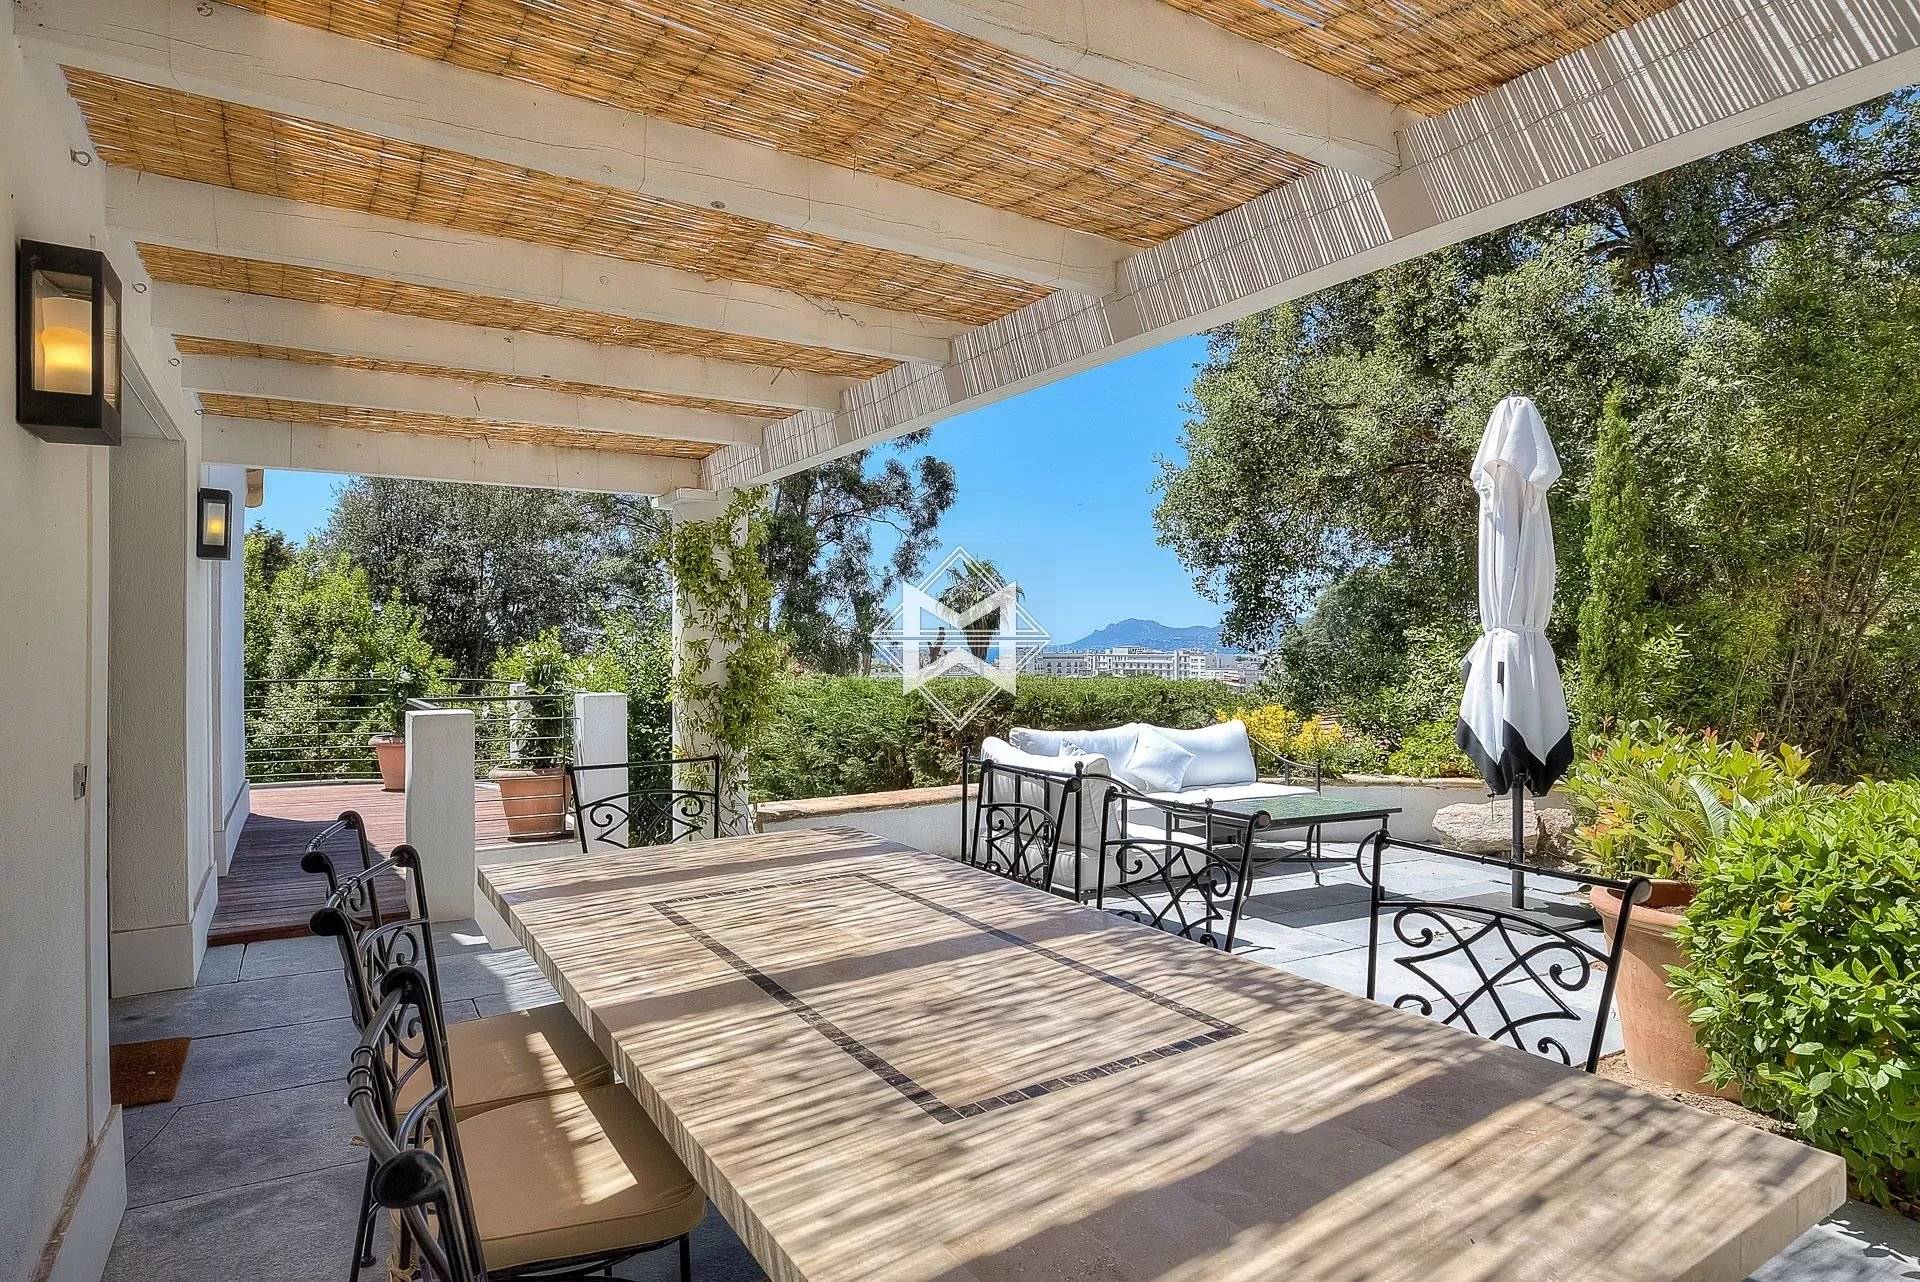 CANNES BASSE CALIFORNIE - Charming villa a few minutes from the centre of Cannes